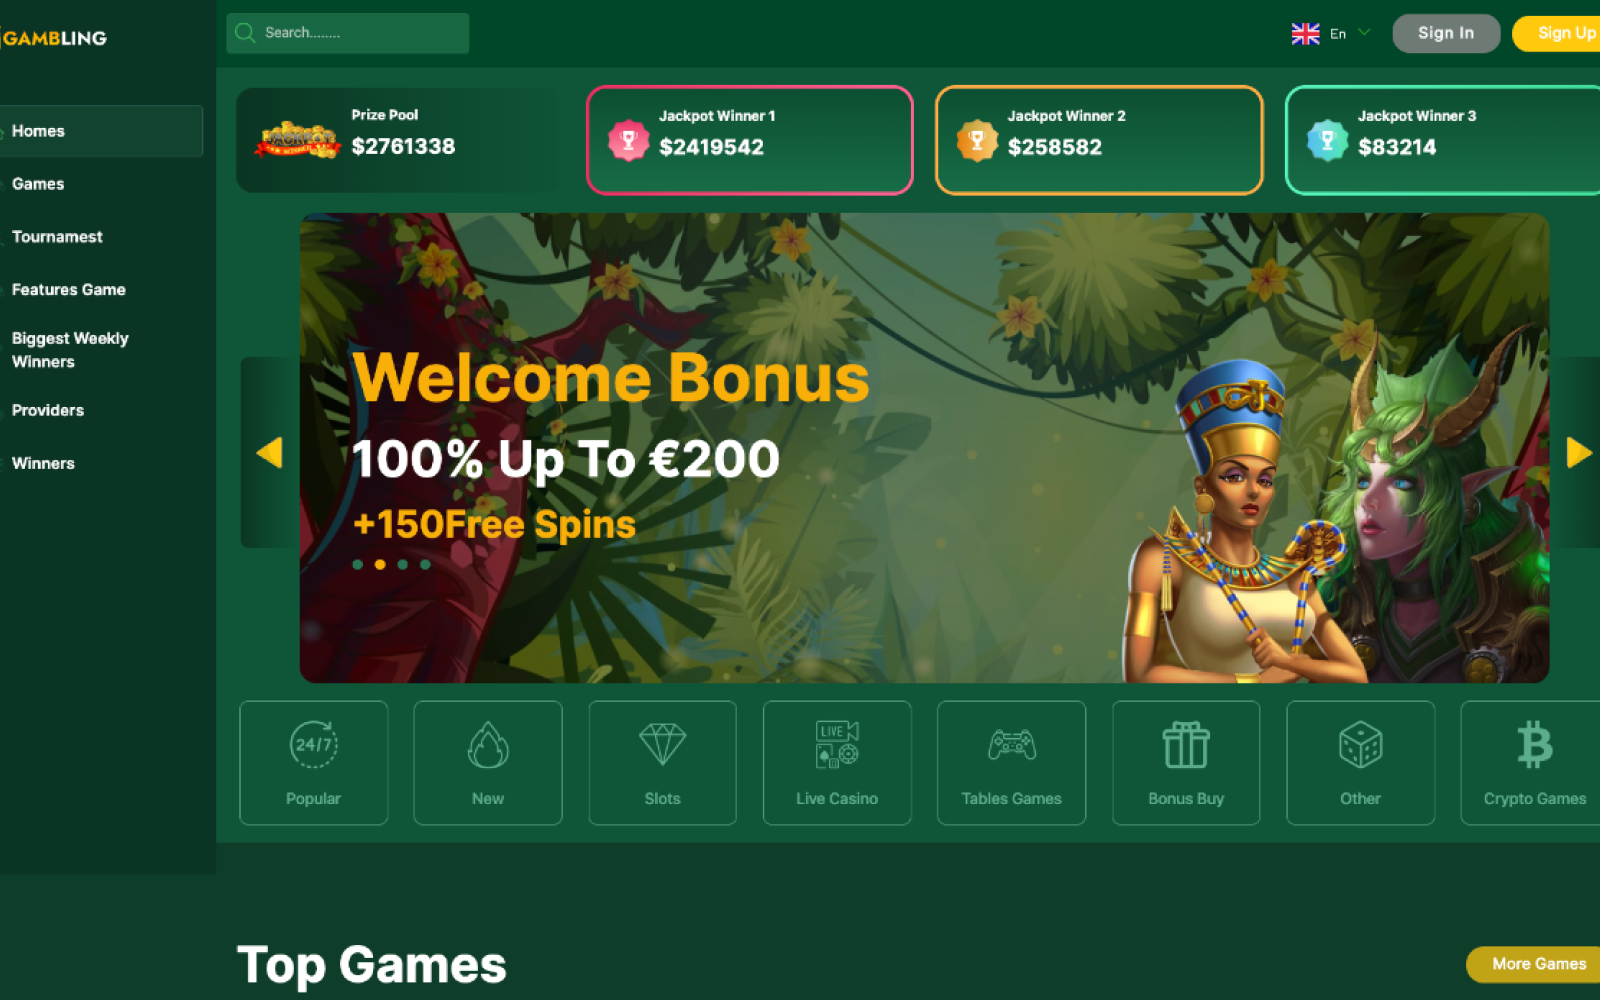 Gambling - Bets & Sports HTML Landing Page Template